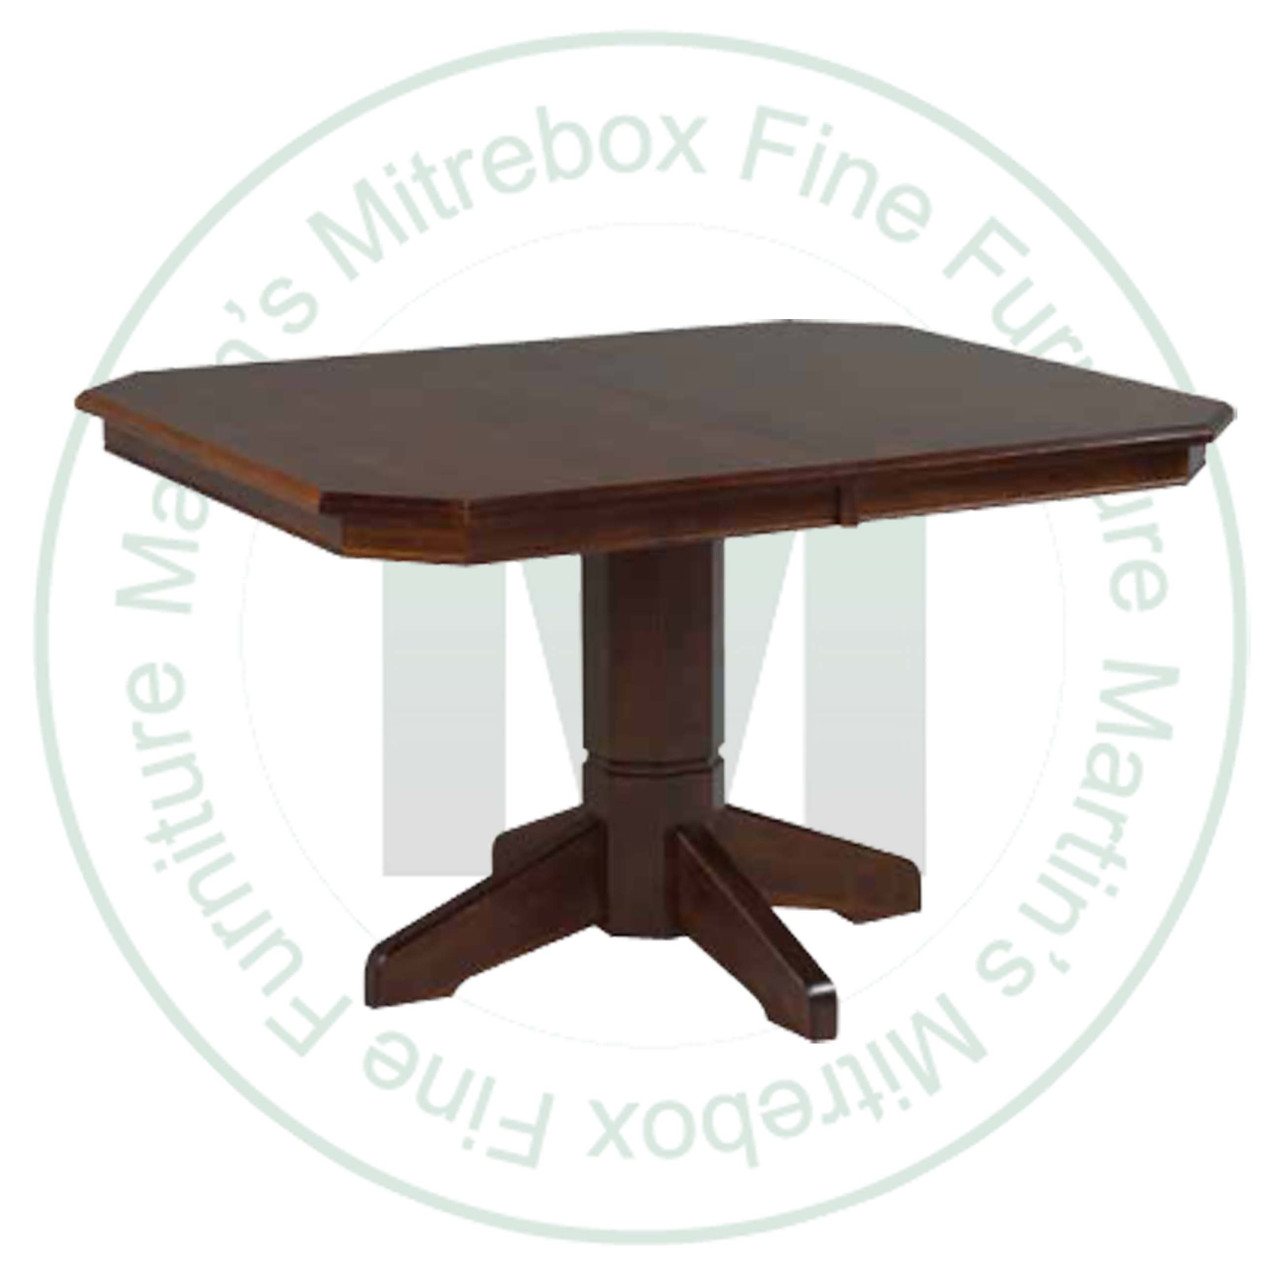 Maple Midtown Single Pedestal Table 60''D x 60''W x 30''H With 2 - 12'' Leaves